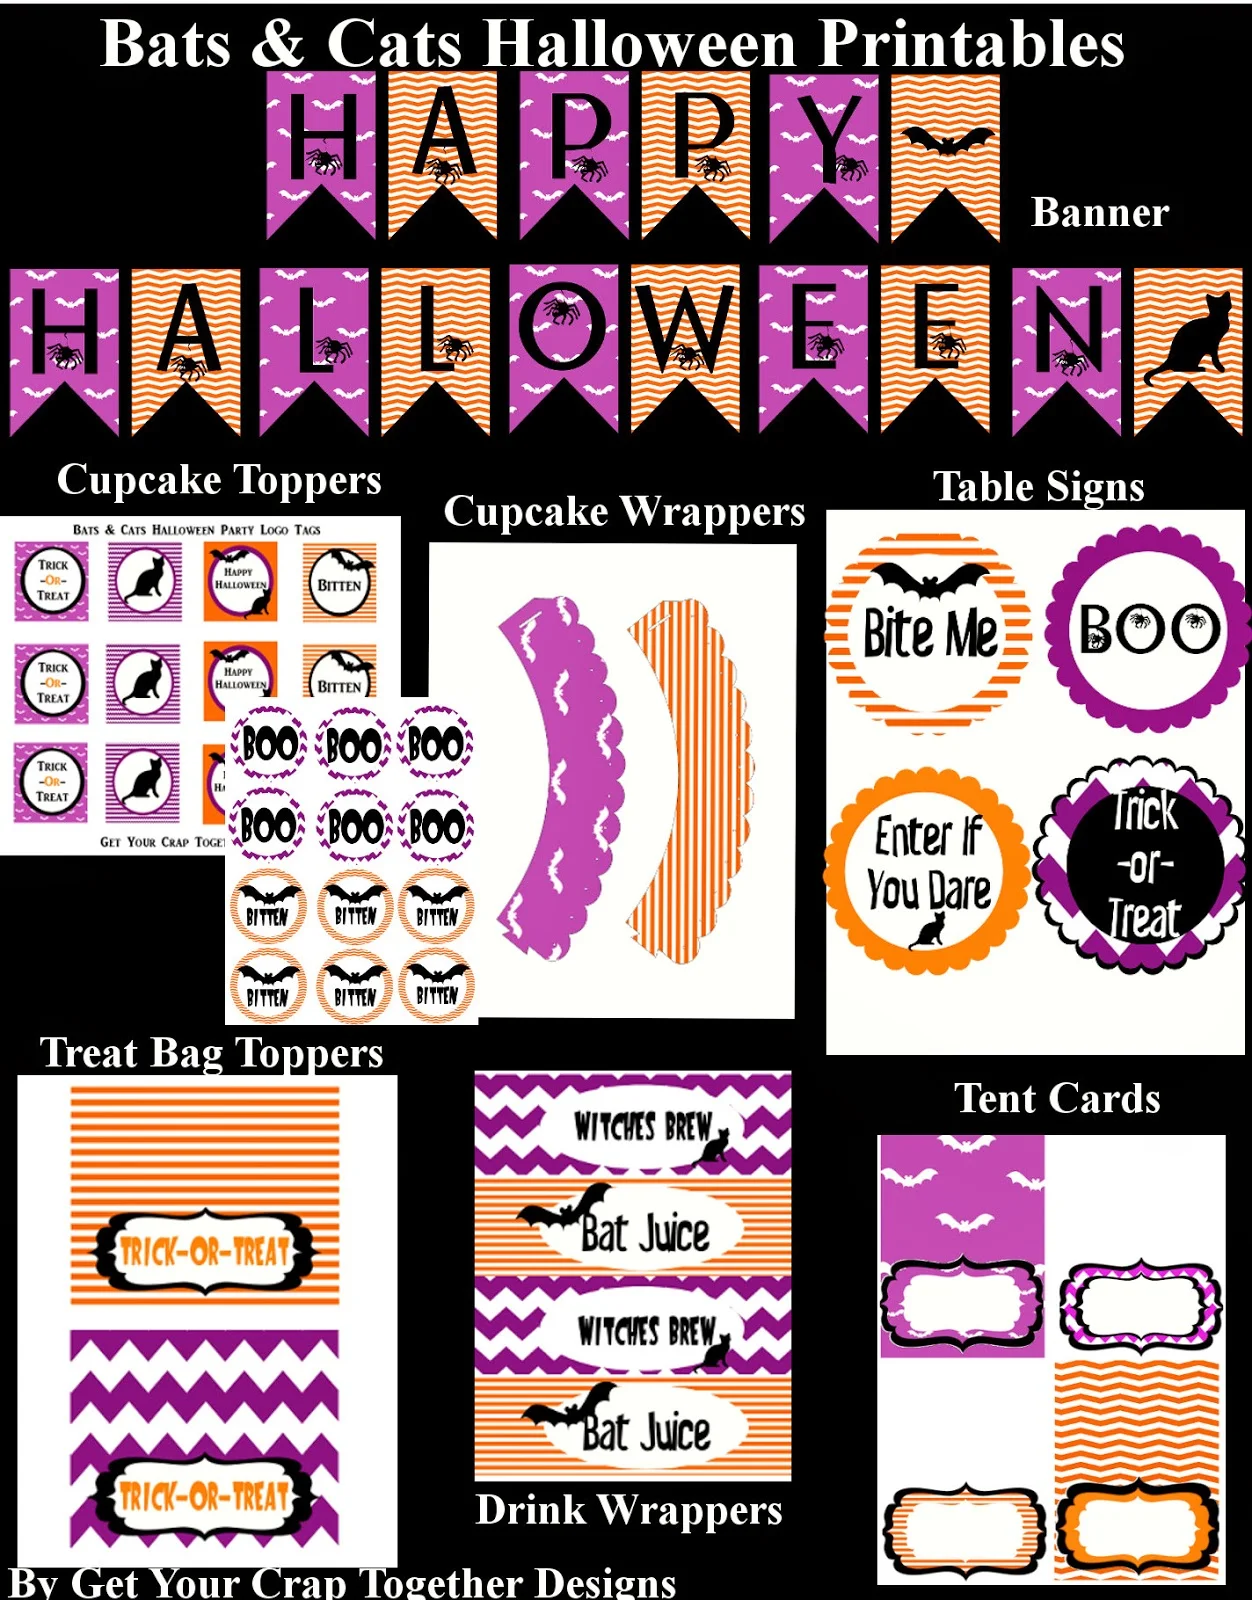 Make your Halloween party memorable with this these free halloween printables for a fun bat and cat party.  Simply download, print and start decorating.